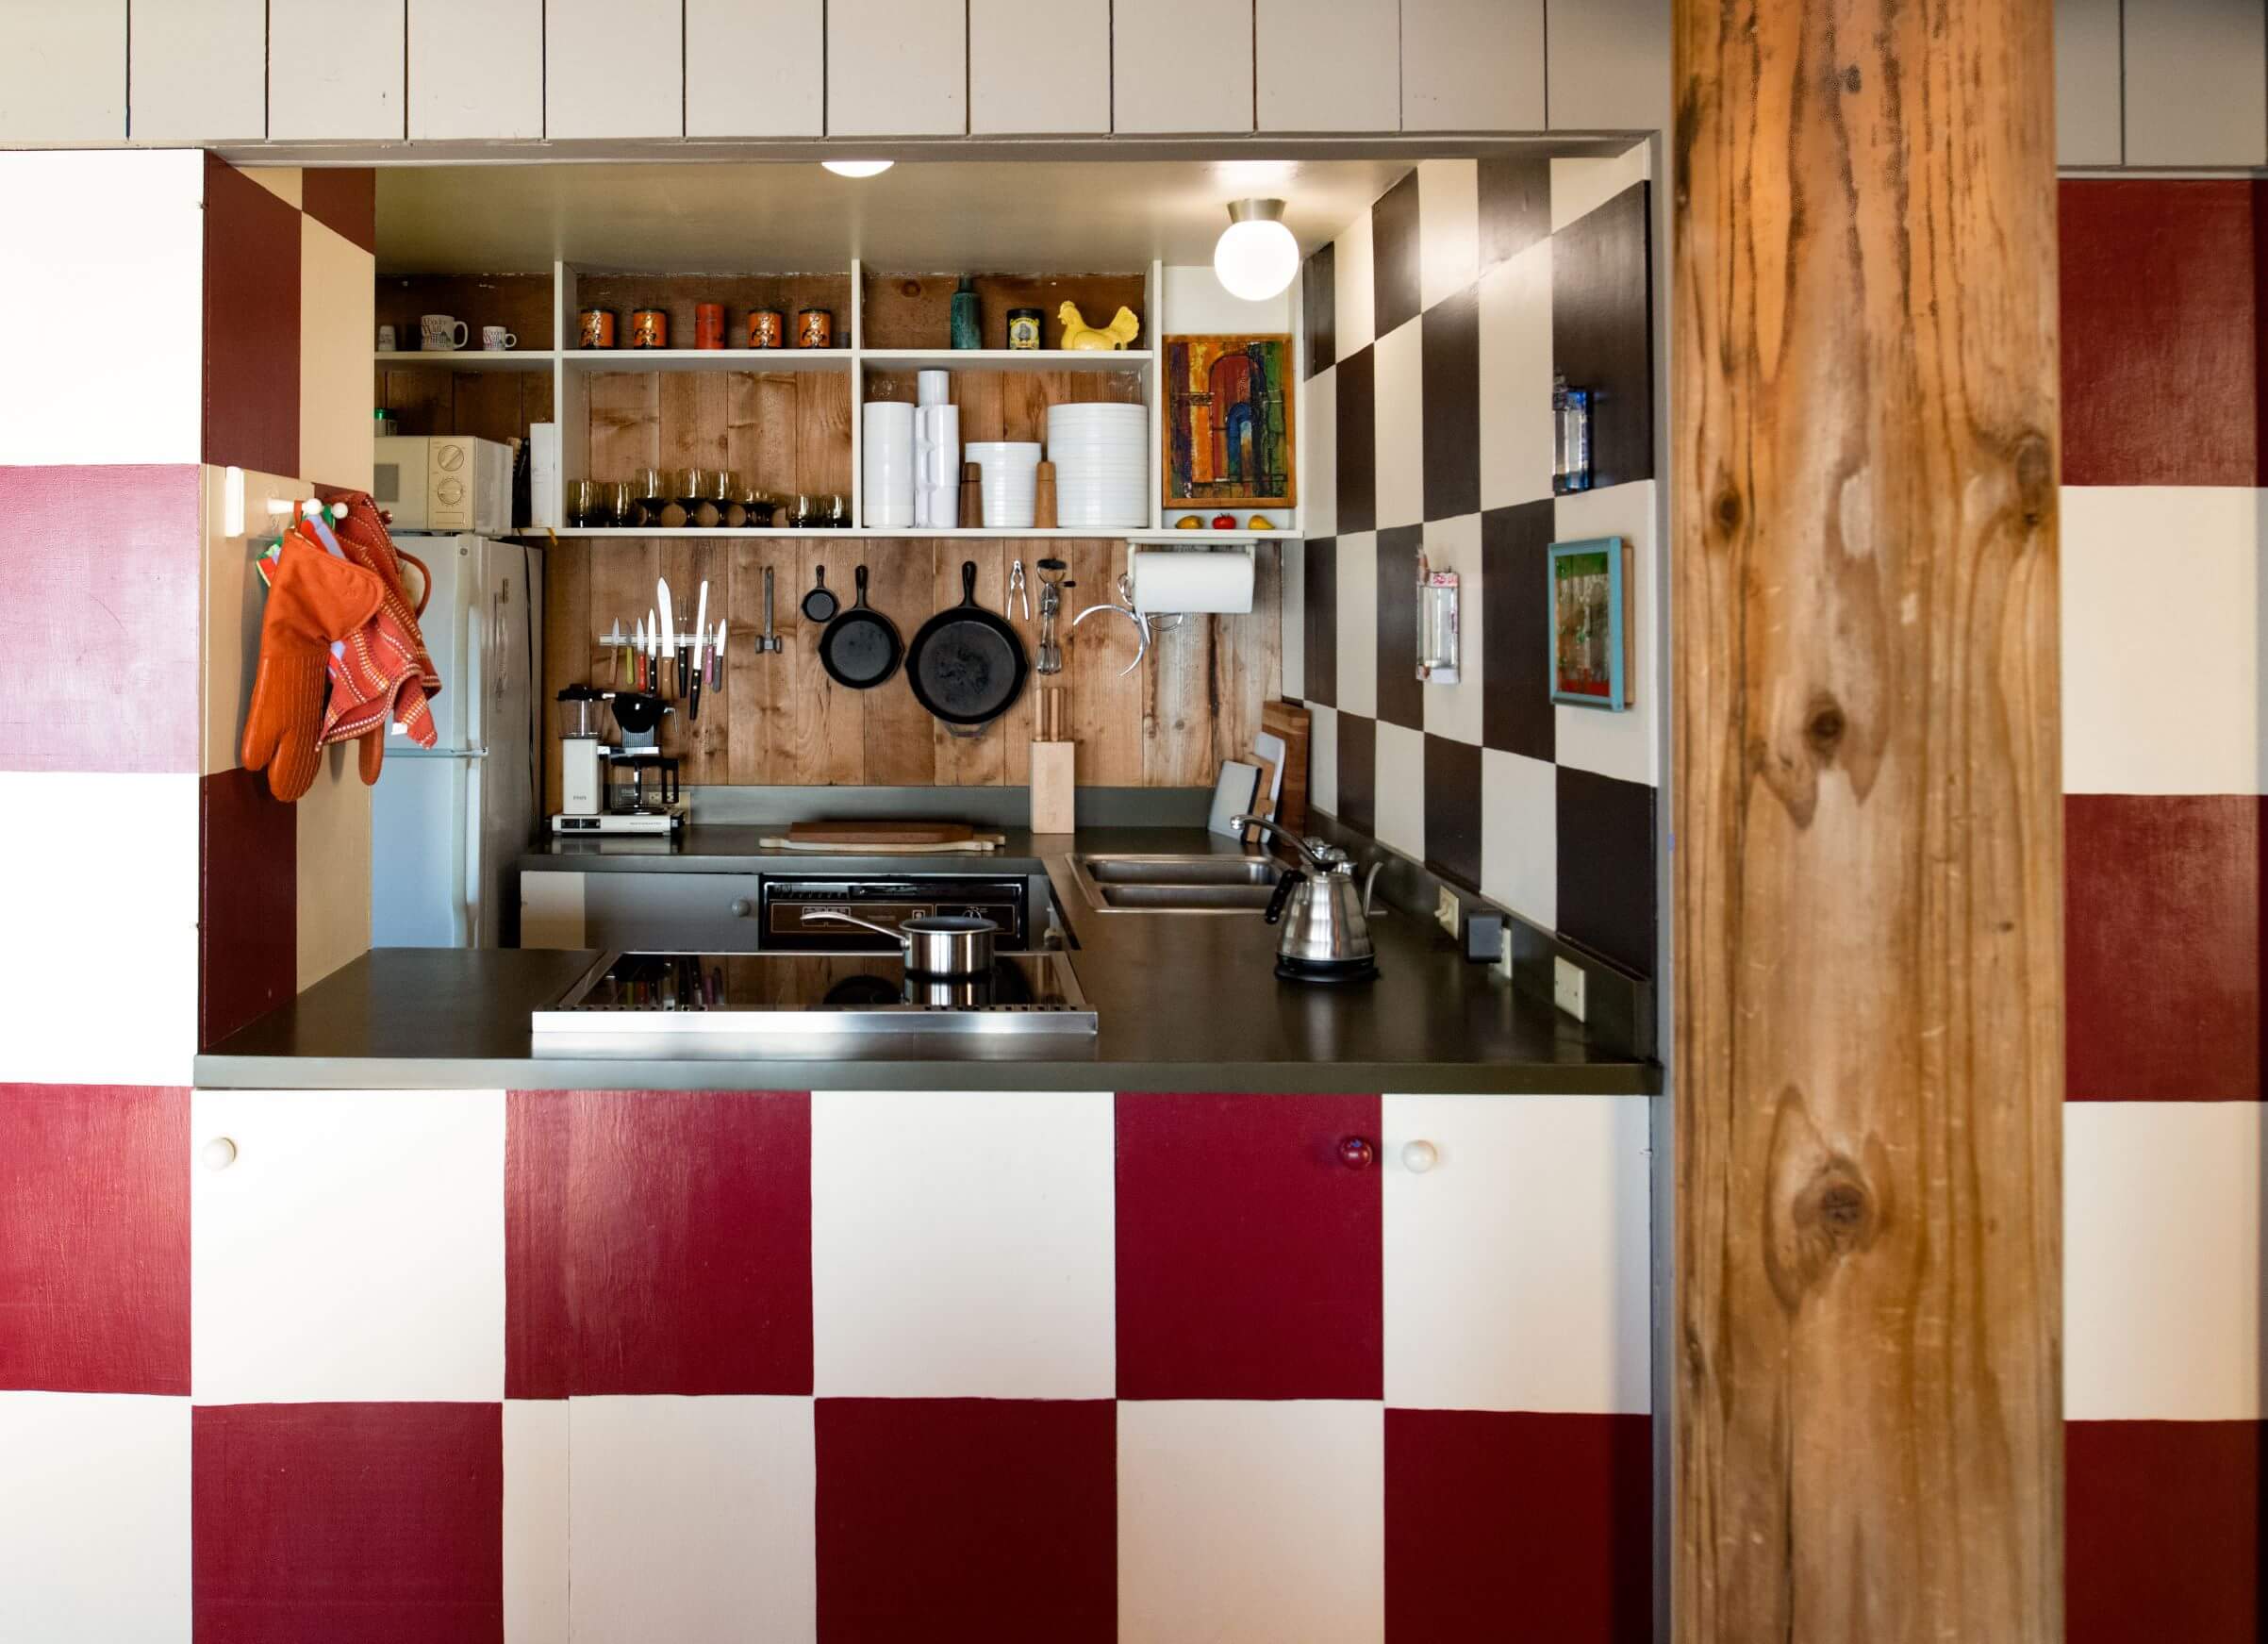 Moore Condo #9 - kitchen passthrough counter with red and white checkered patterned wall.